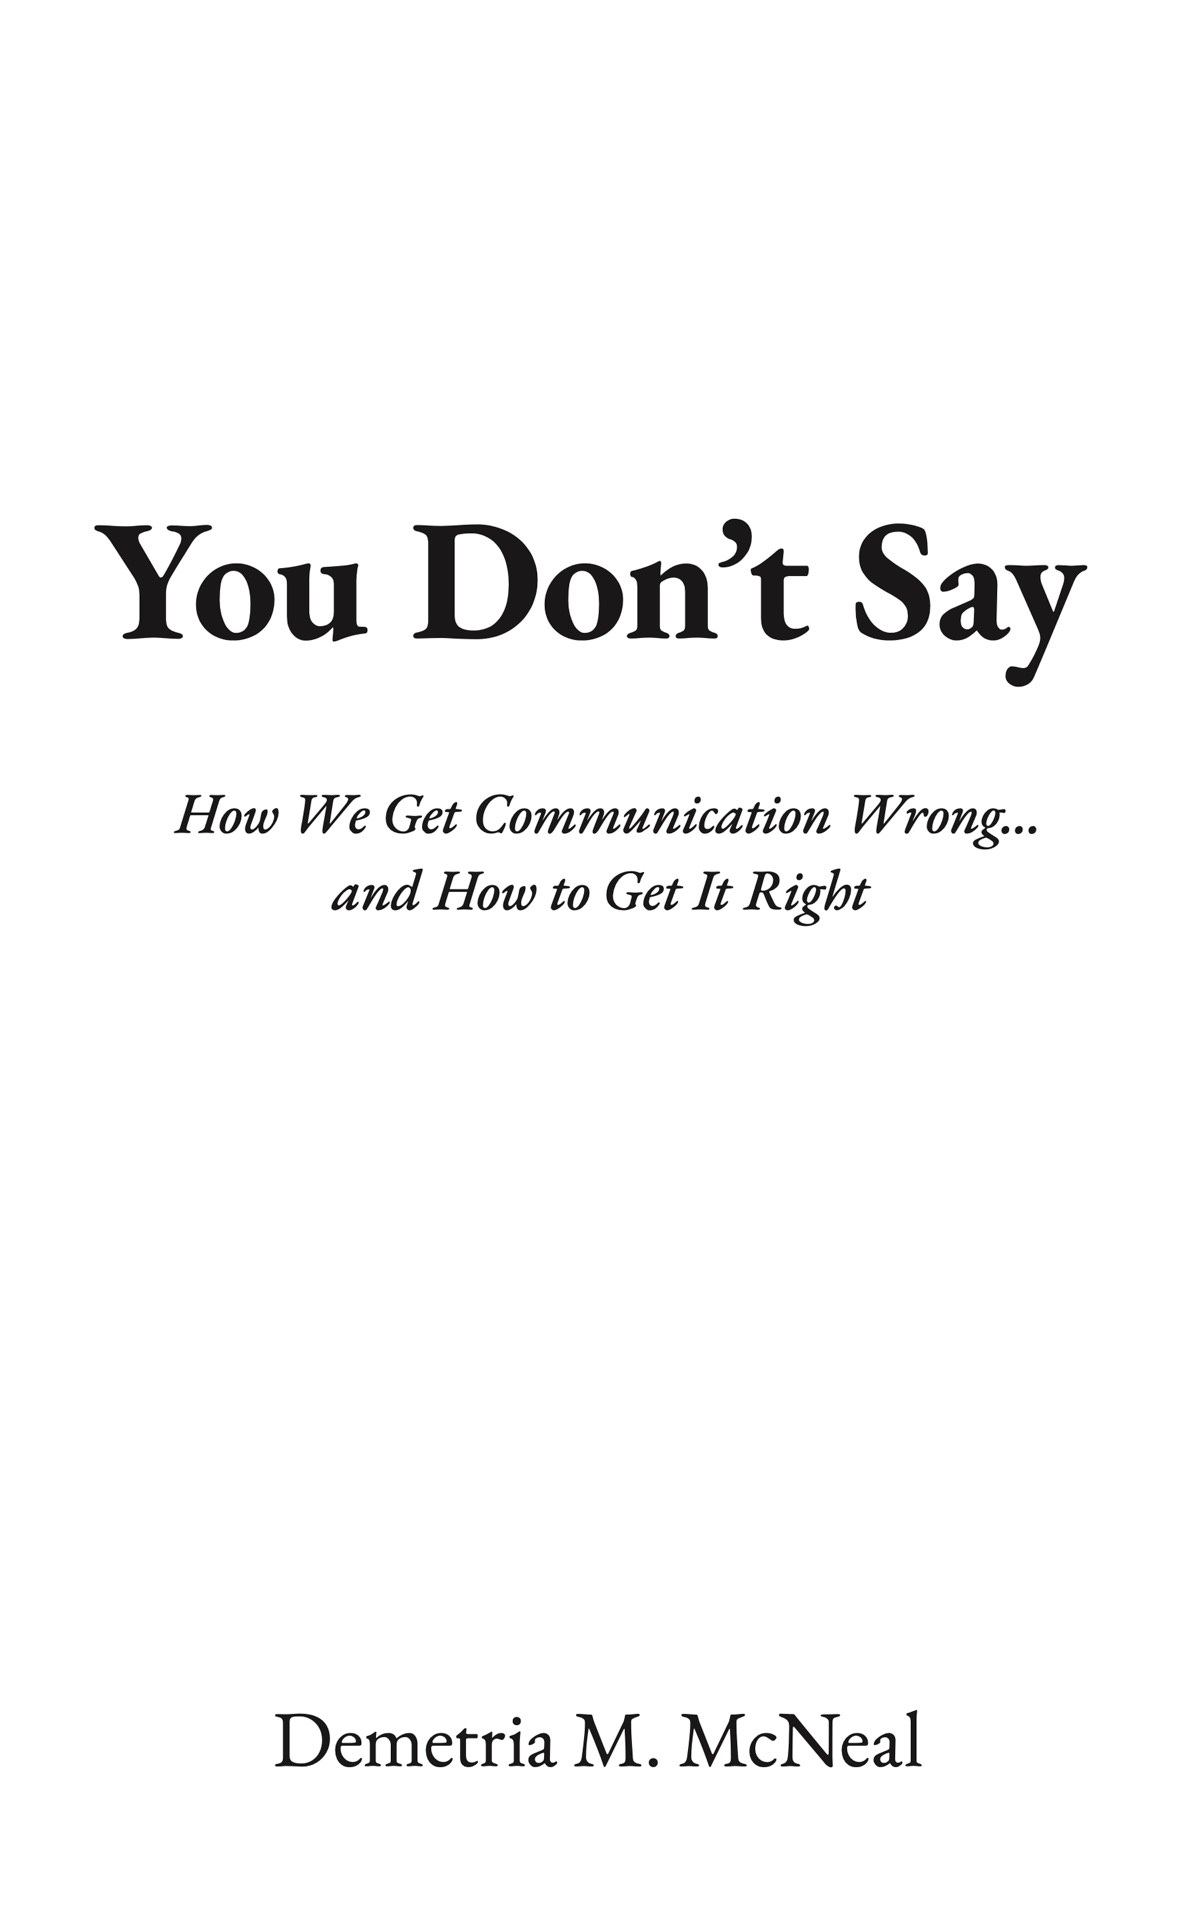 You Dont Say How We Get Communication Wrong and How to Get It Right Copyright - photo 1